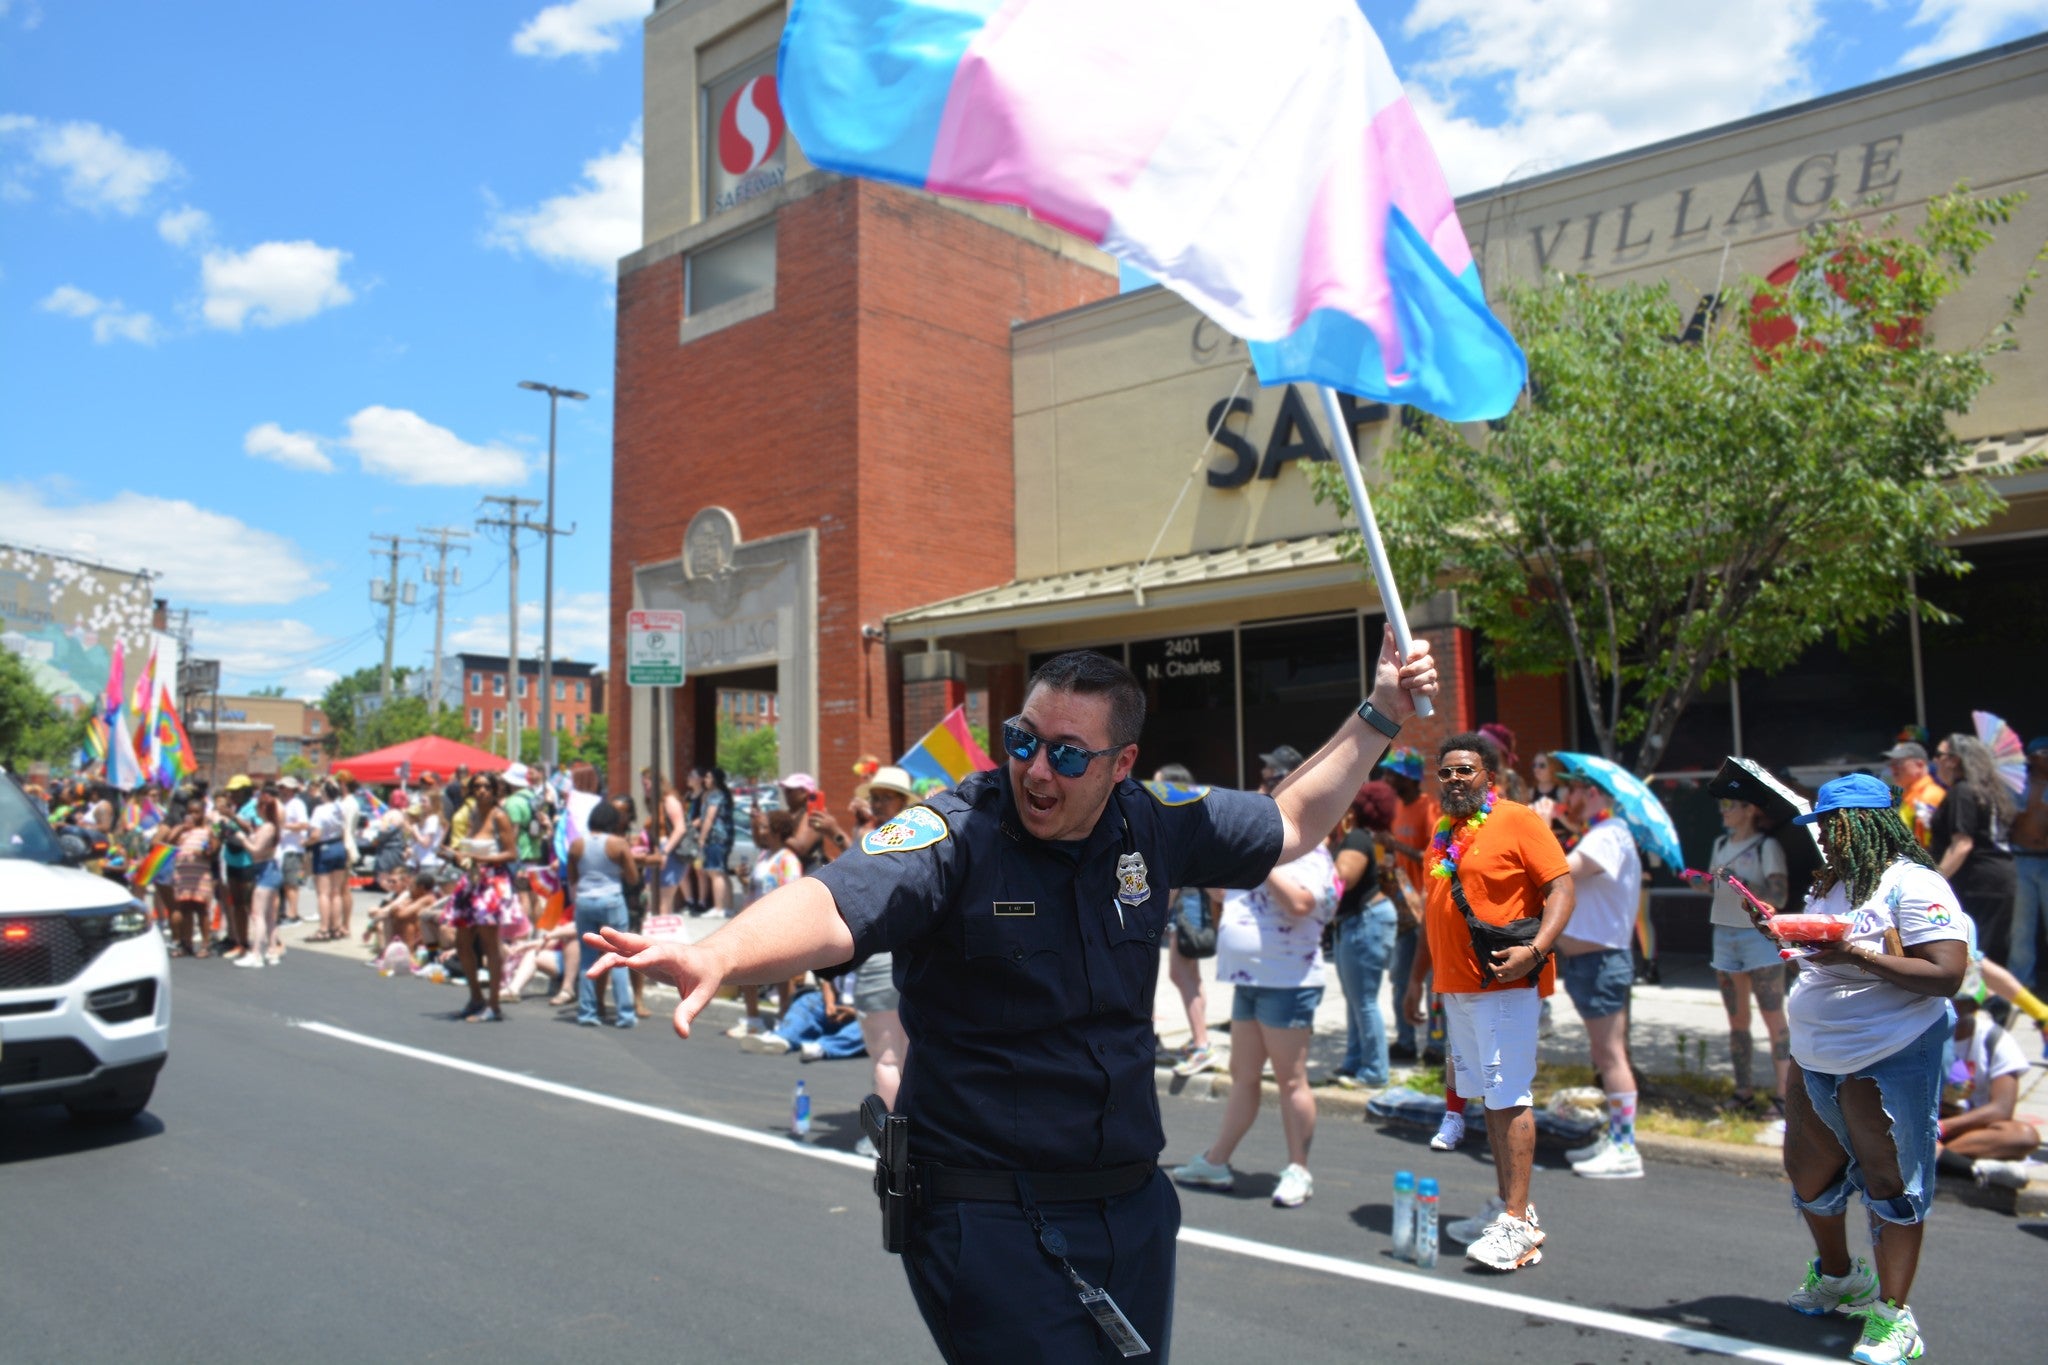 The Baltimore Police Department marched during the Pride parade on Saturday. The event ended when the crowd went into a panic when Mace was sprayed during a fight and fireworks filled the sky.